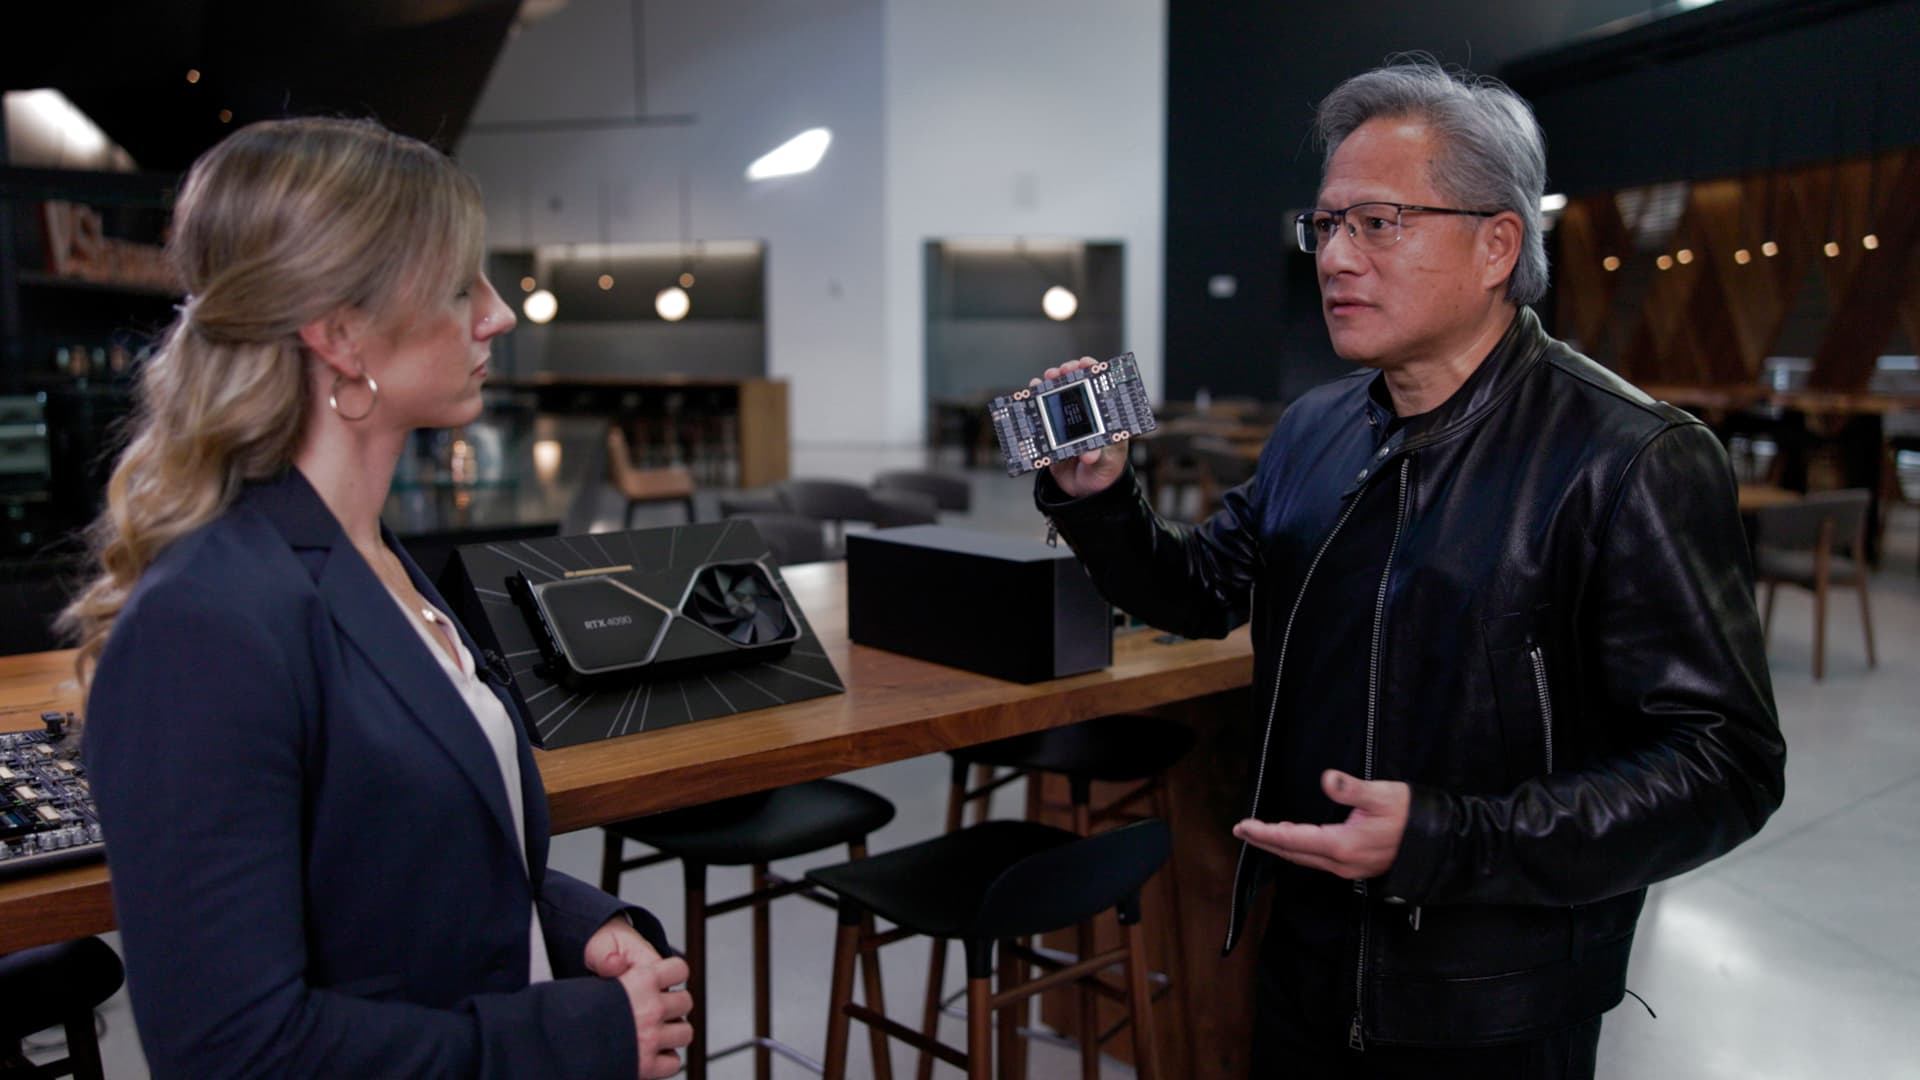 Nvidia CEO Jensen Huang’s bet big on A.I. is paying off as his core technology powers ChatGPT